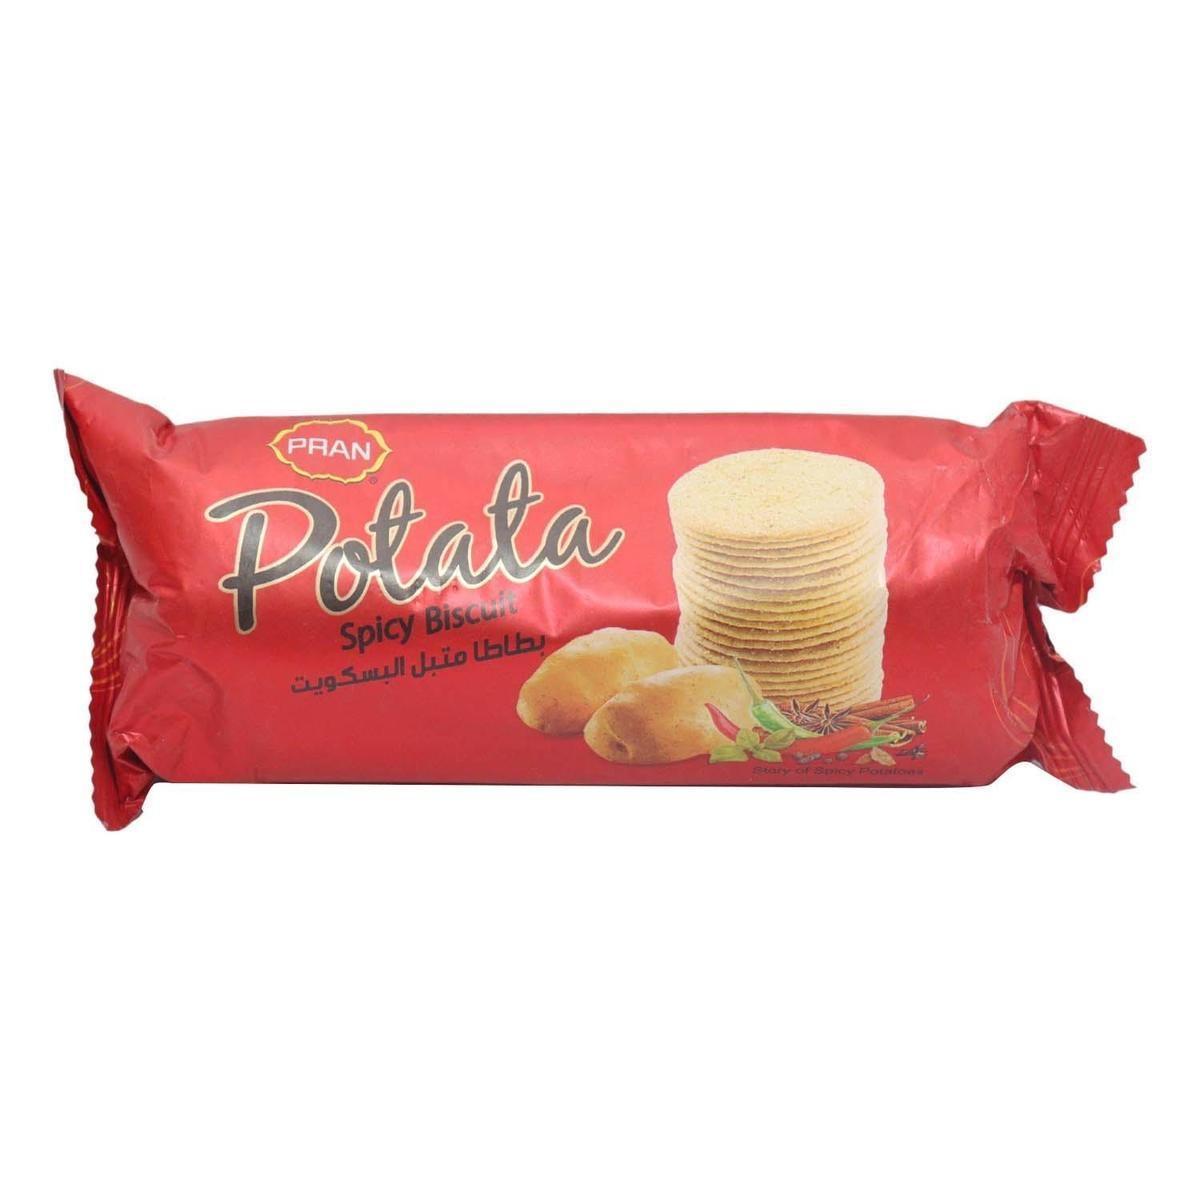 pran potata spicy biscuit available for inside valley only